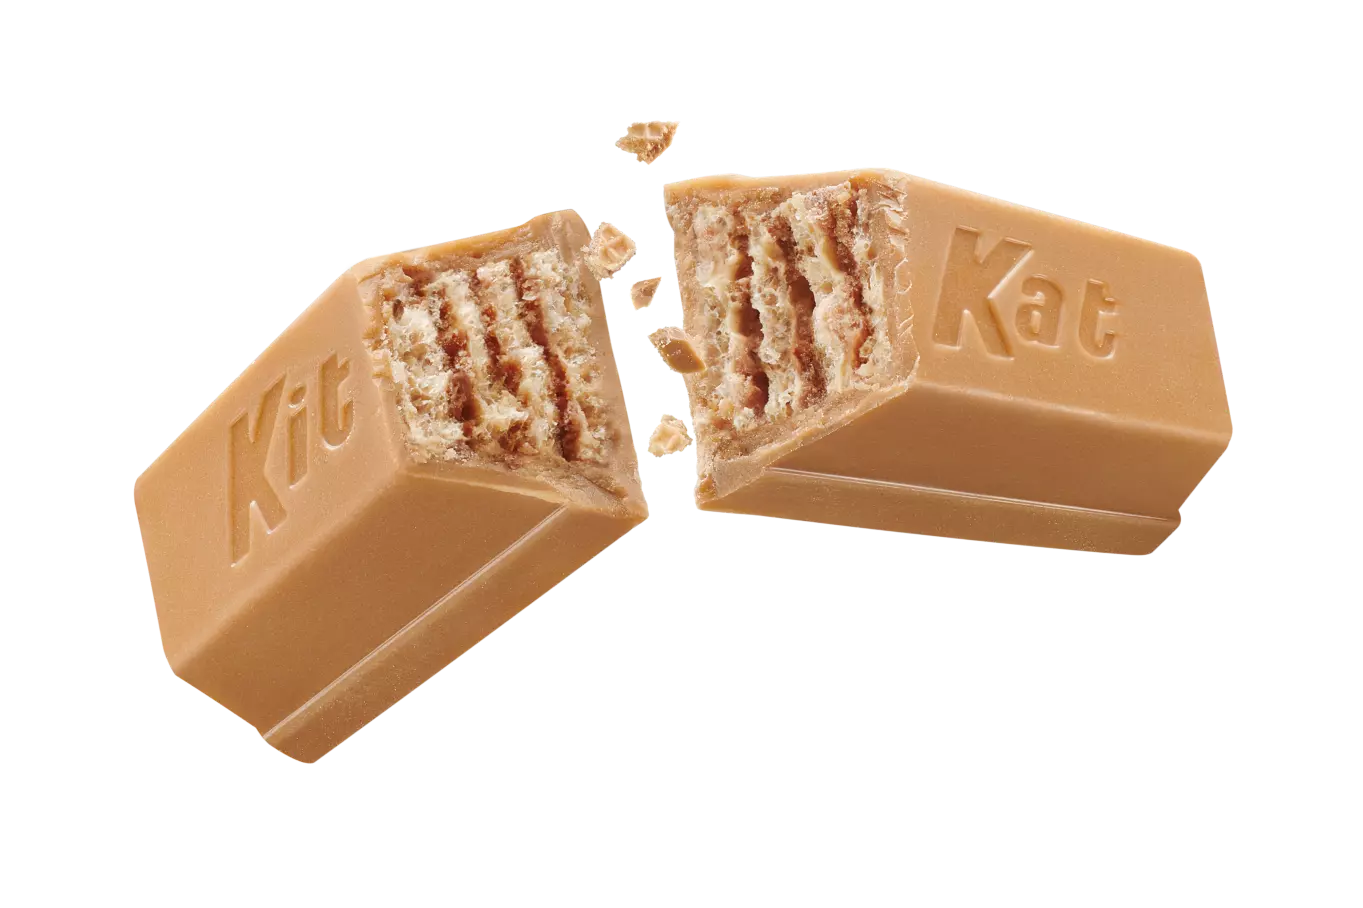 KIT KAT® Gingerbread Cookie Miniatures Candy Bars, 8.4 oz bag - Out of Package